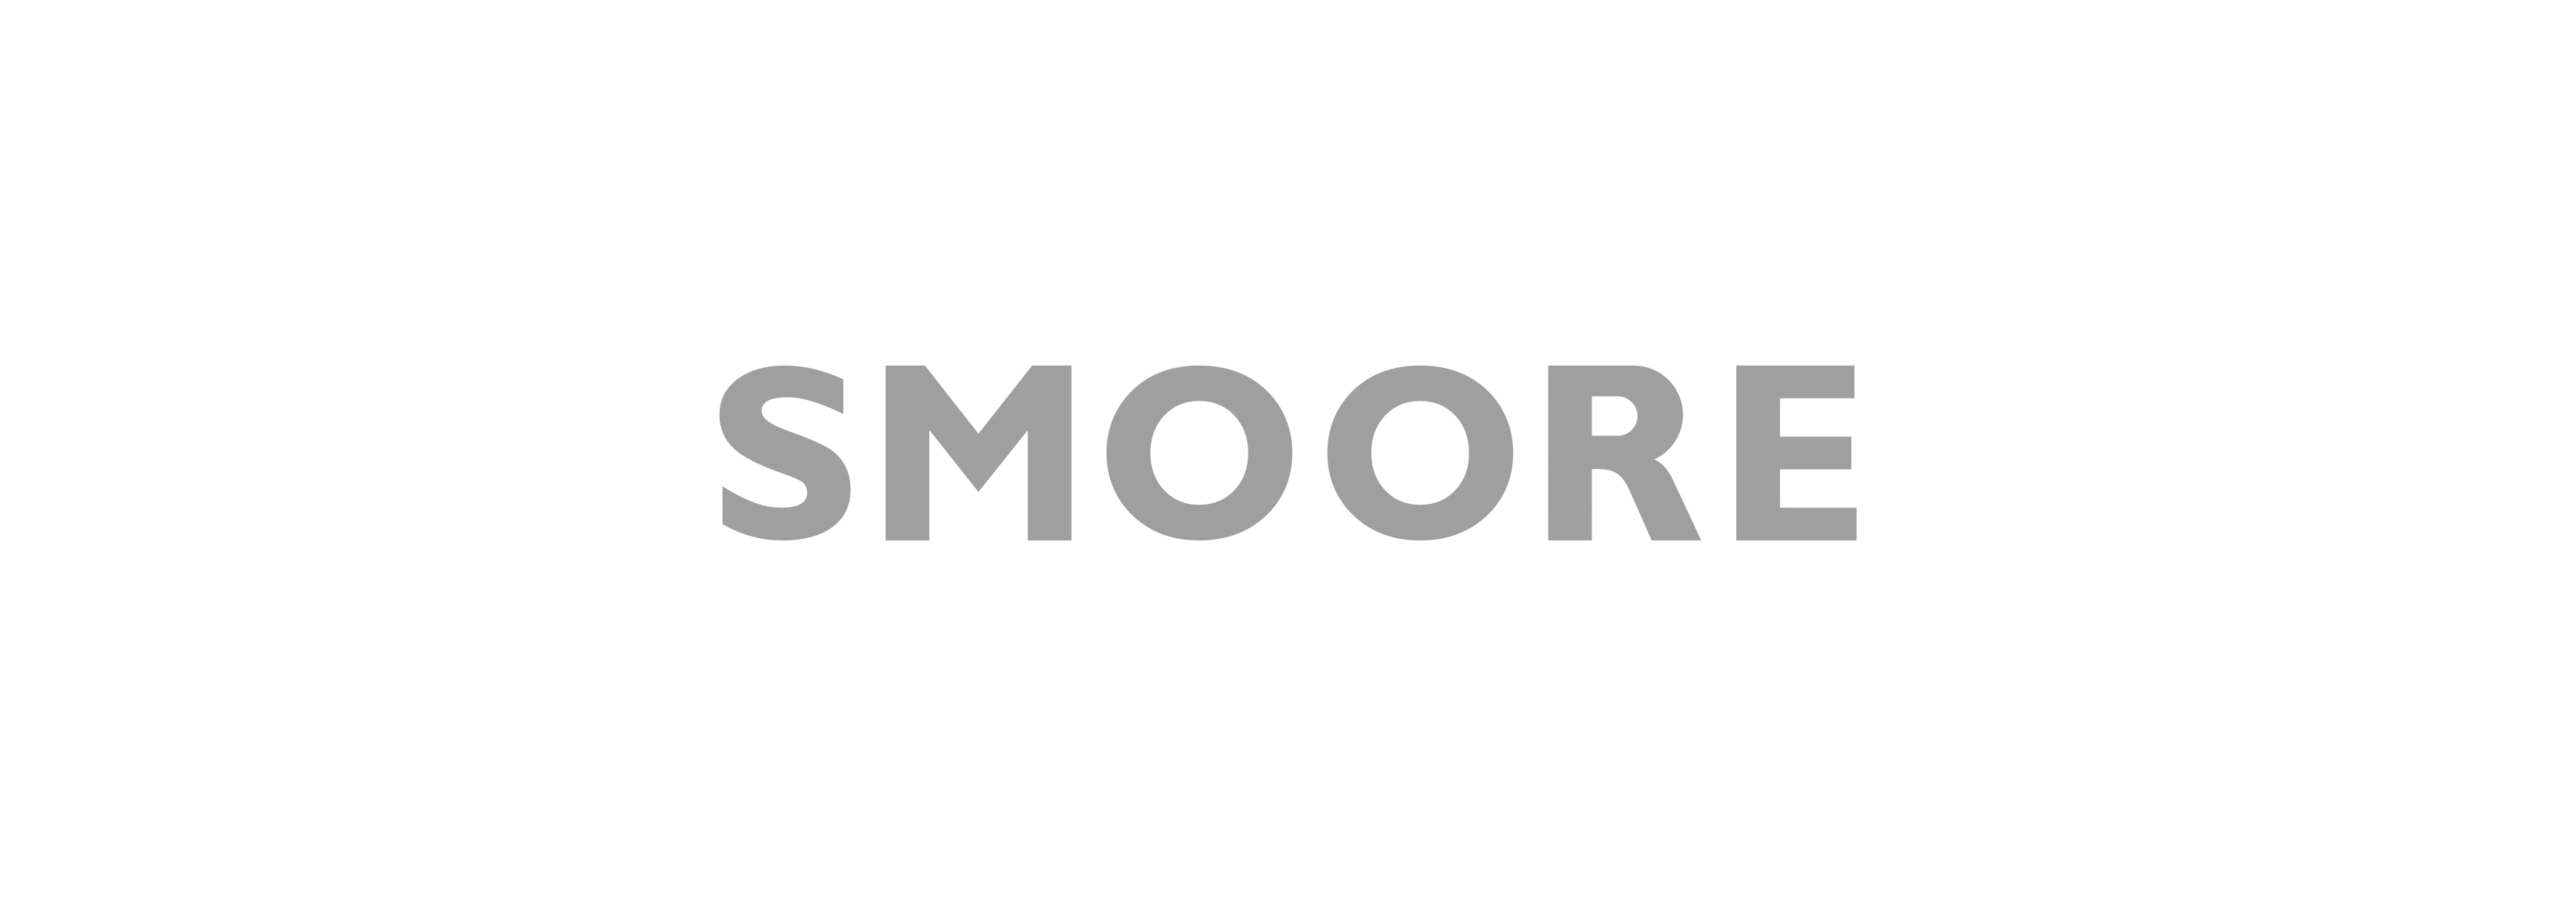 SMOORE-文化墙